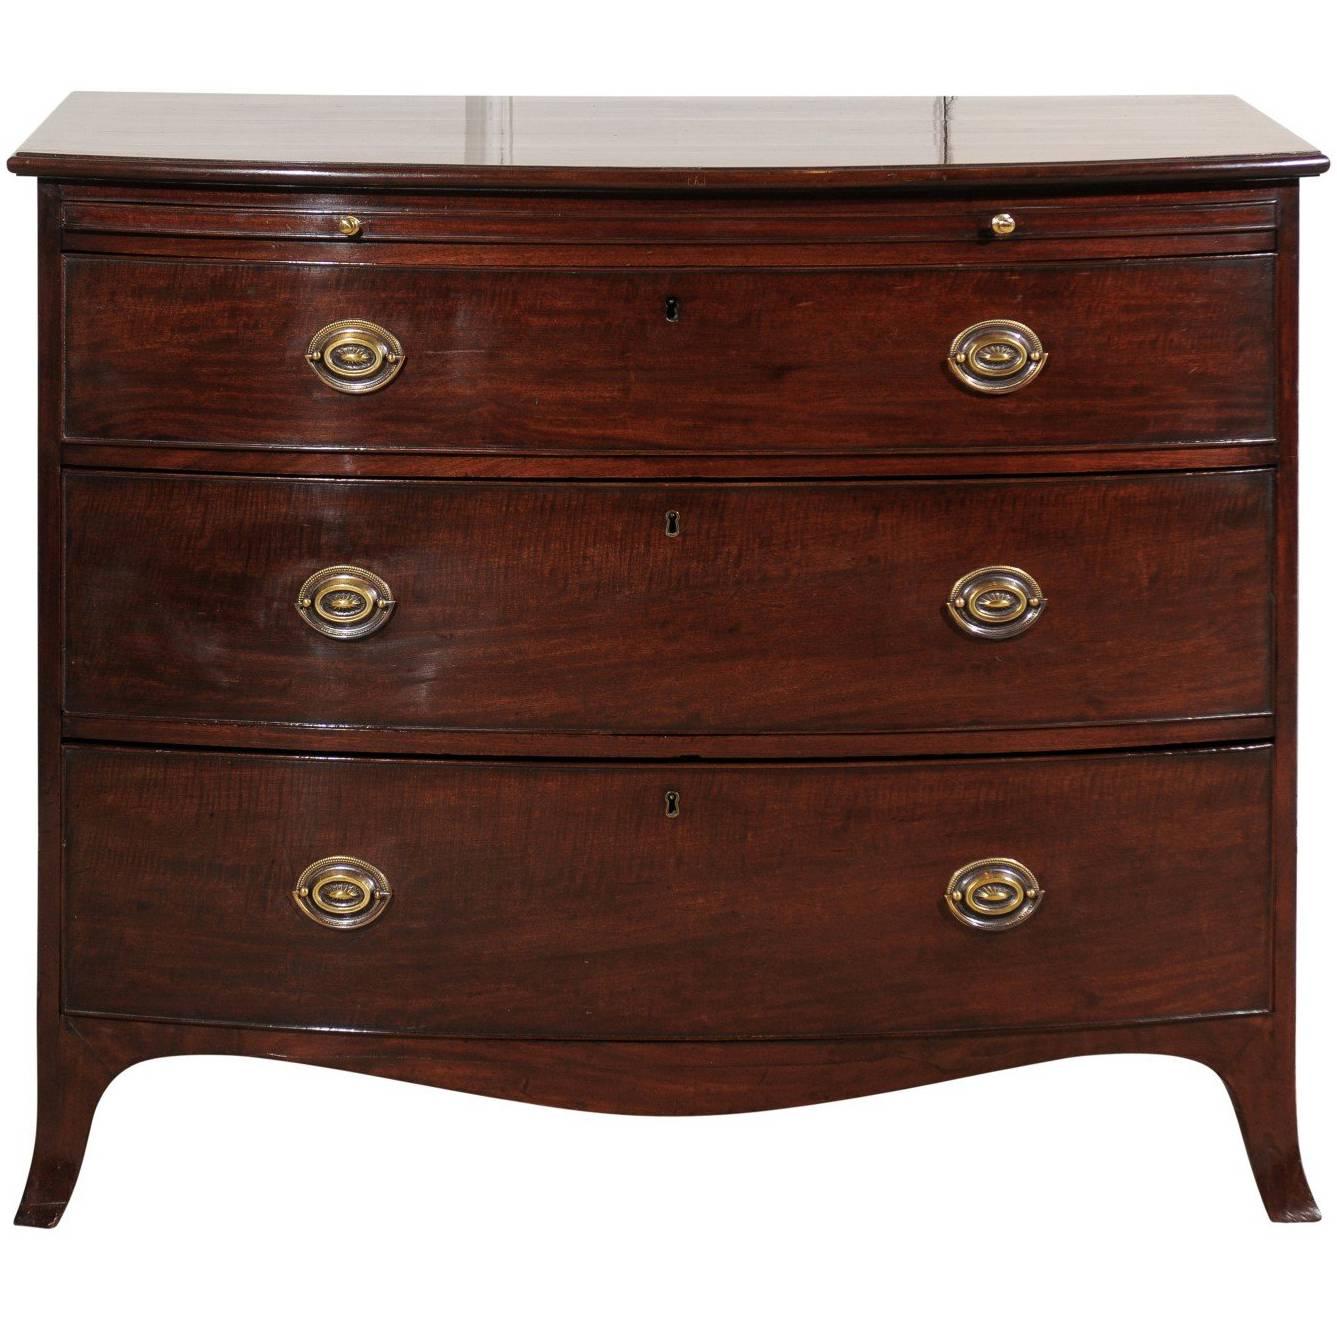 English Bow Front Chest in Mahogany with Three Drawers, circa 1890 For Sale